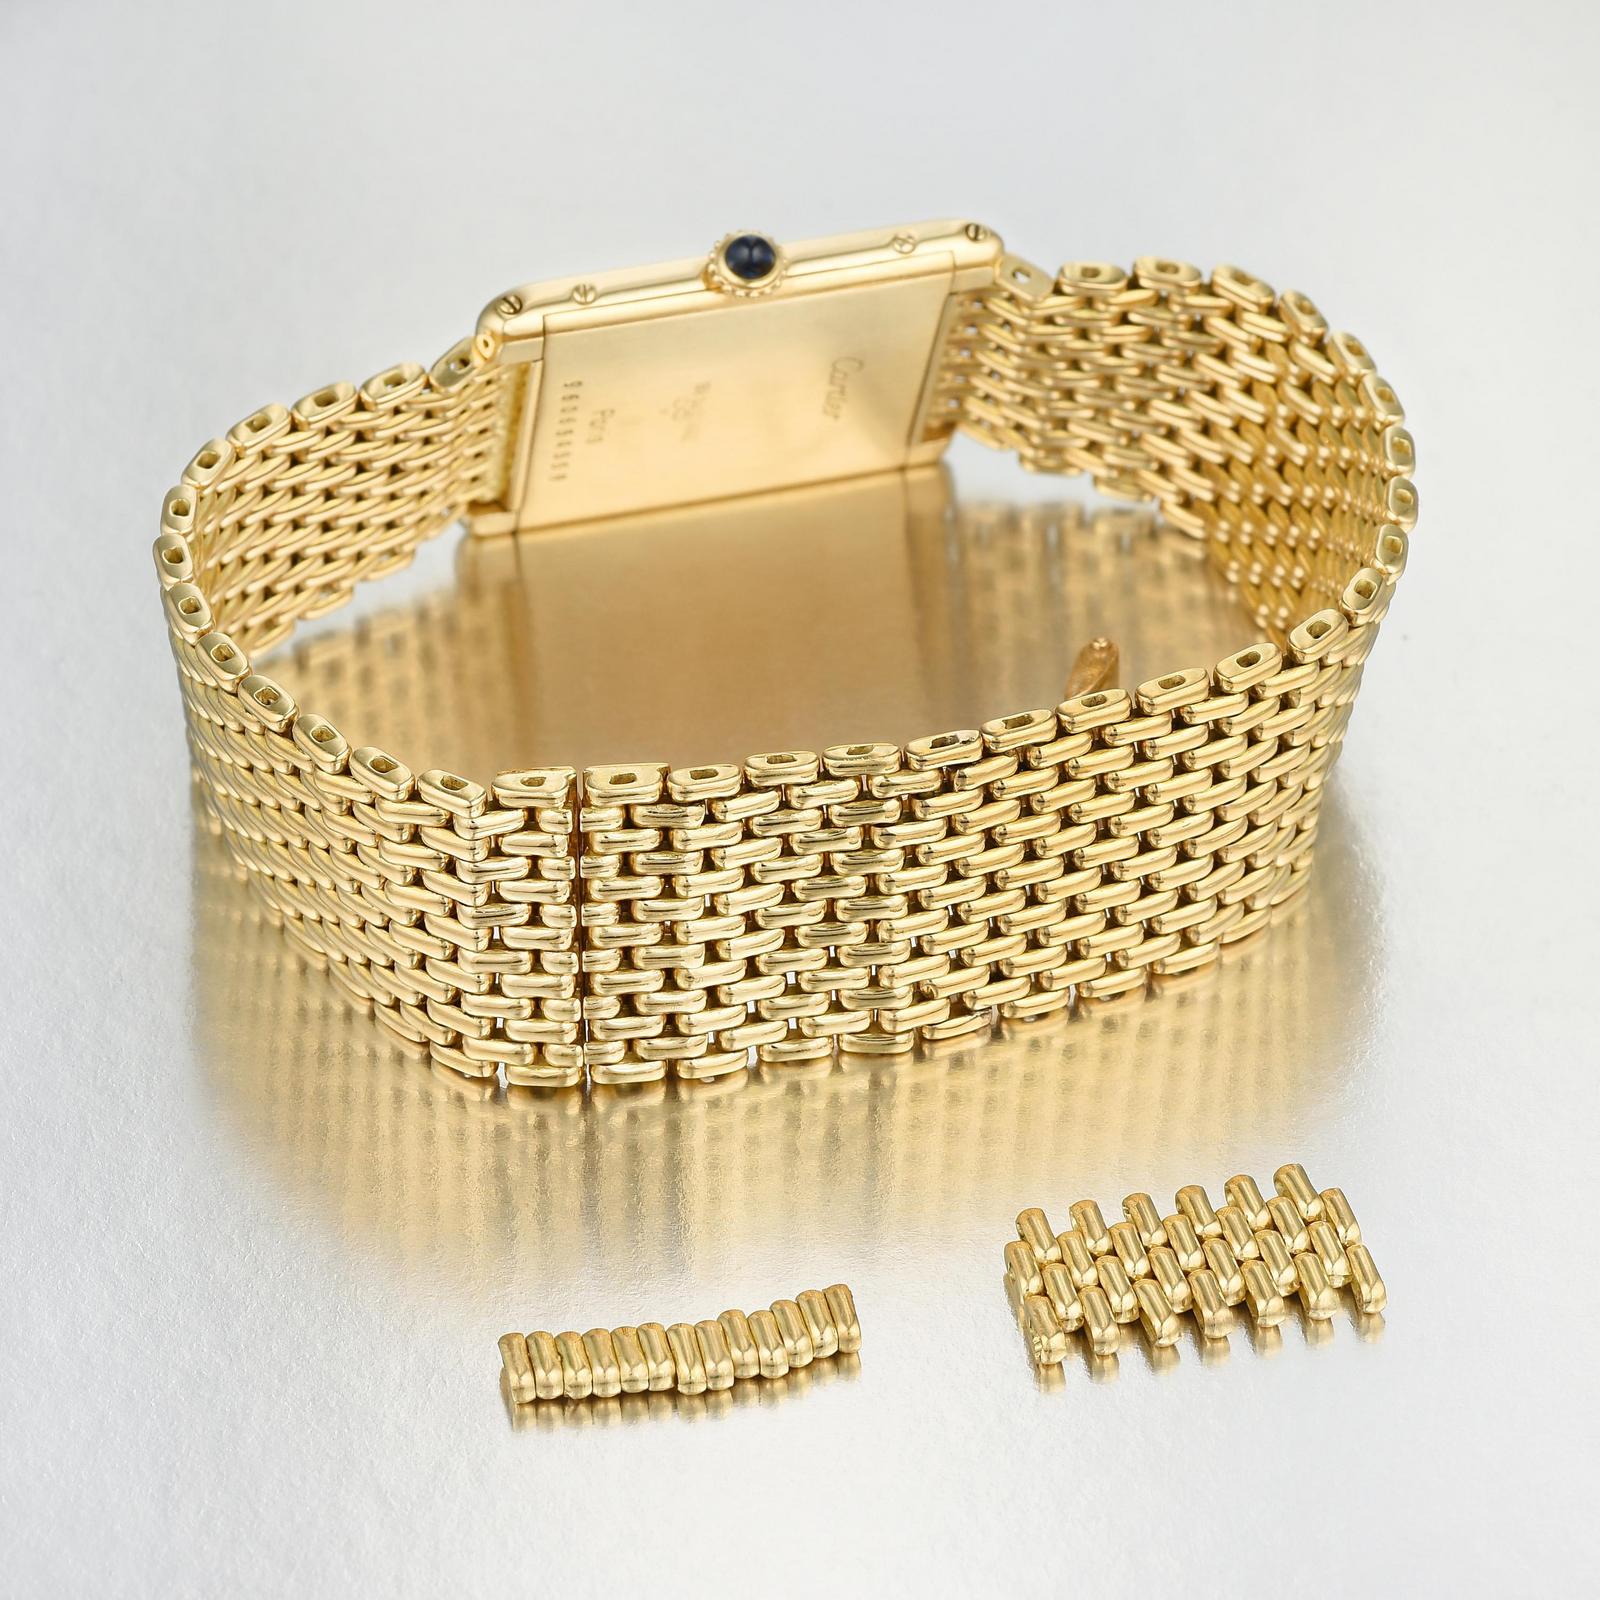 SOLD**Cartier Vintage Tank Louis Ultra Thin, With Beads of Rice Bracelet